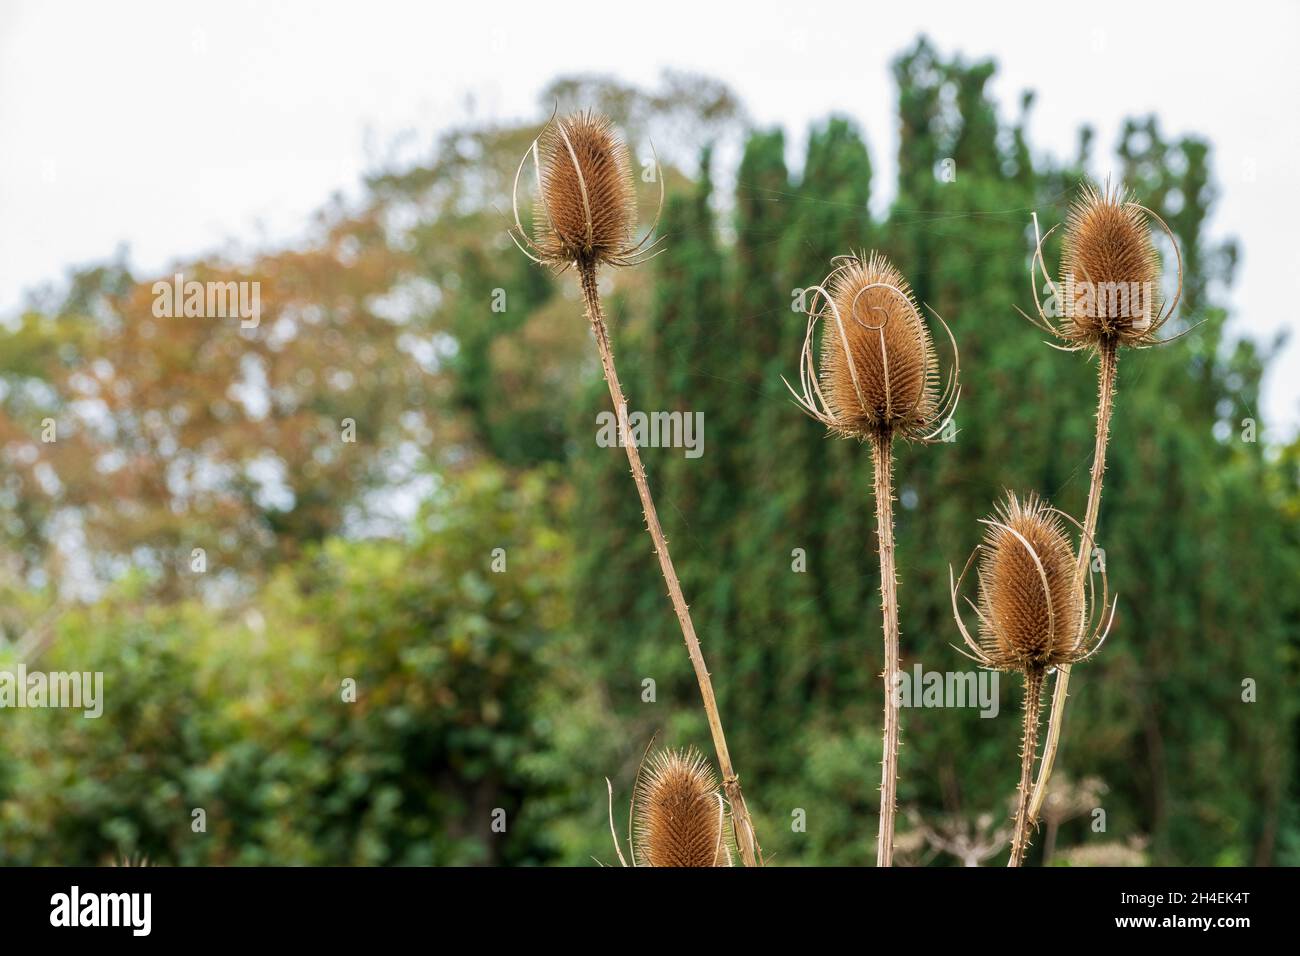 Dried teasel heads against a soft focus background Stock Photo